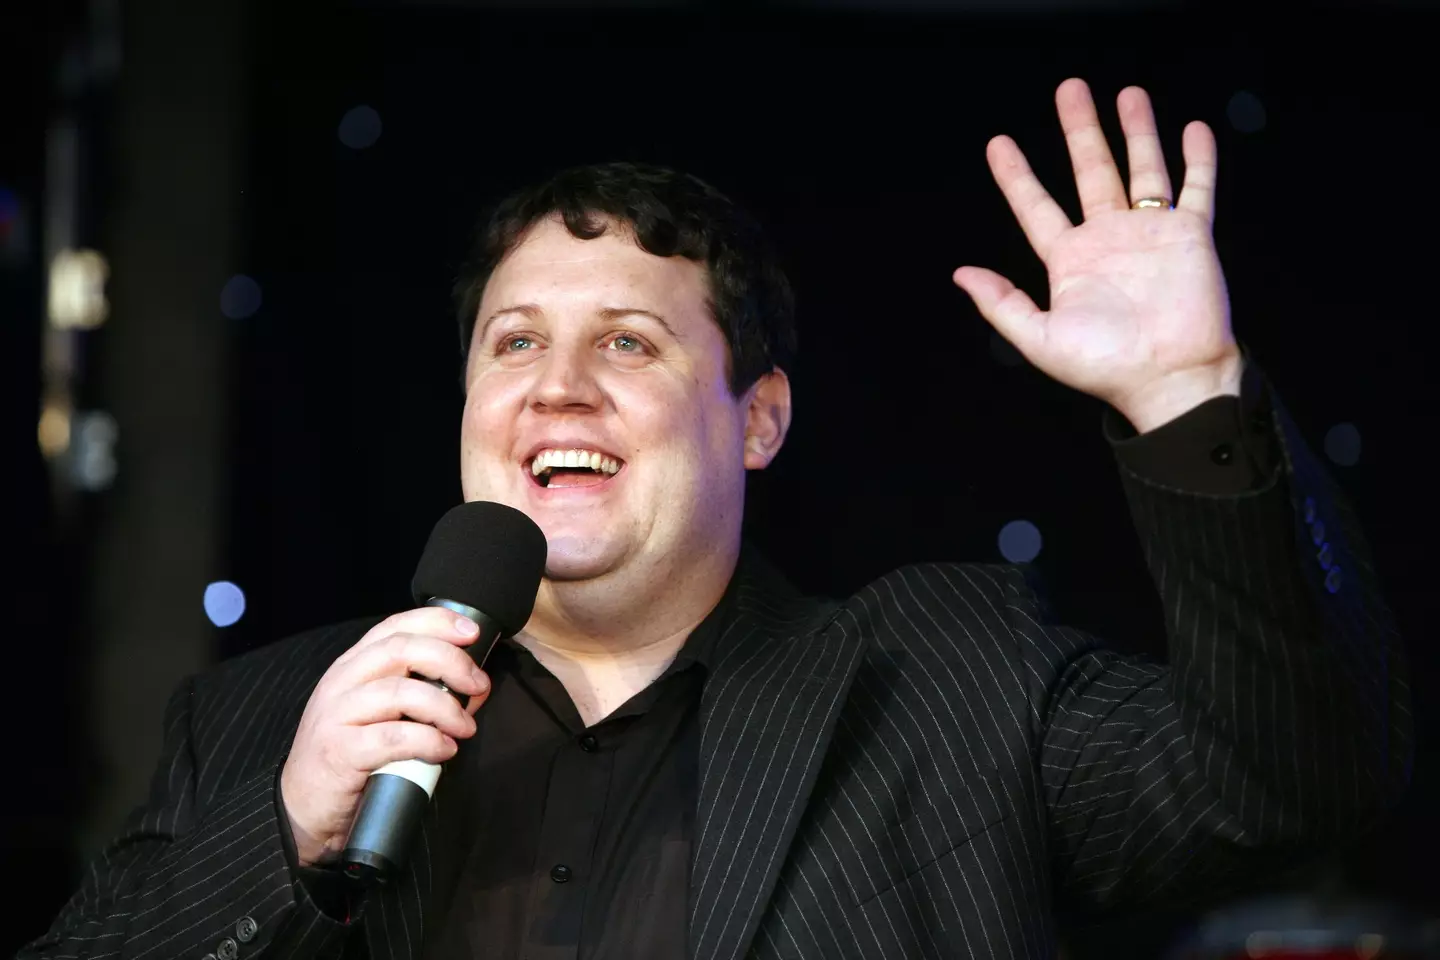 The queues for Peter Kay tickets have been as long as 60,000 for some people.